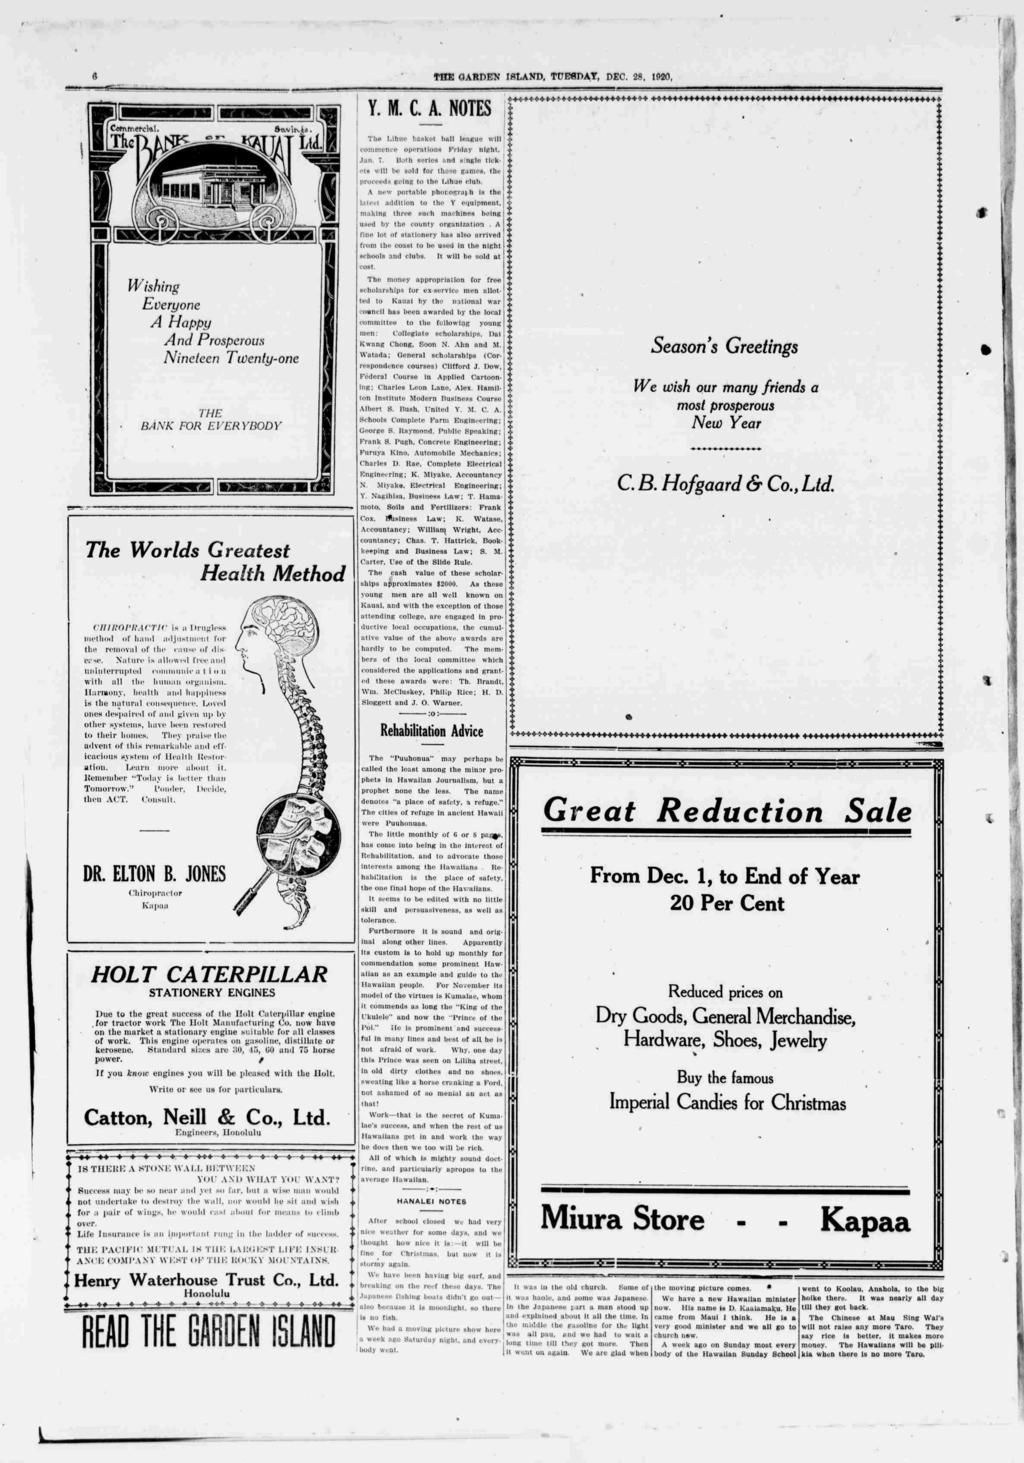 THE GARDEN SLAND, TUESDAY, DEC. 28, 1920, Y. M. C. A. NOTES, Z3 EZZ Commercal. D ft, m The Lhuc basket ball league wll The T Ltd. commence operatons Frday nght, Jan. 7.